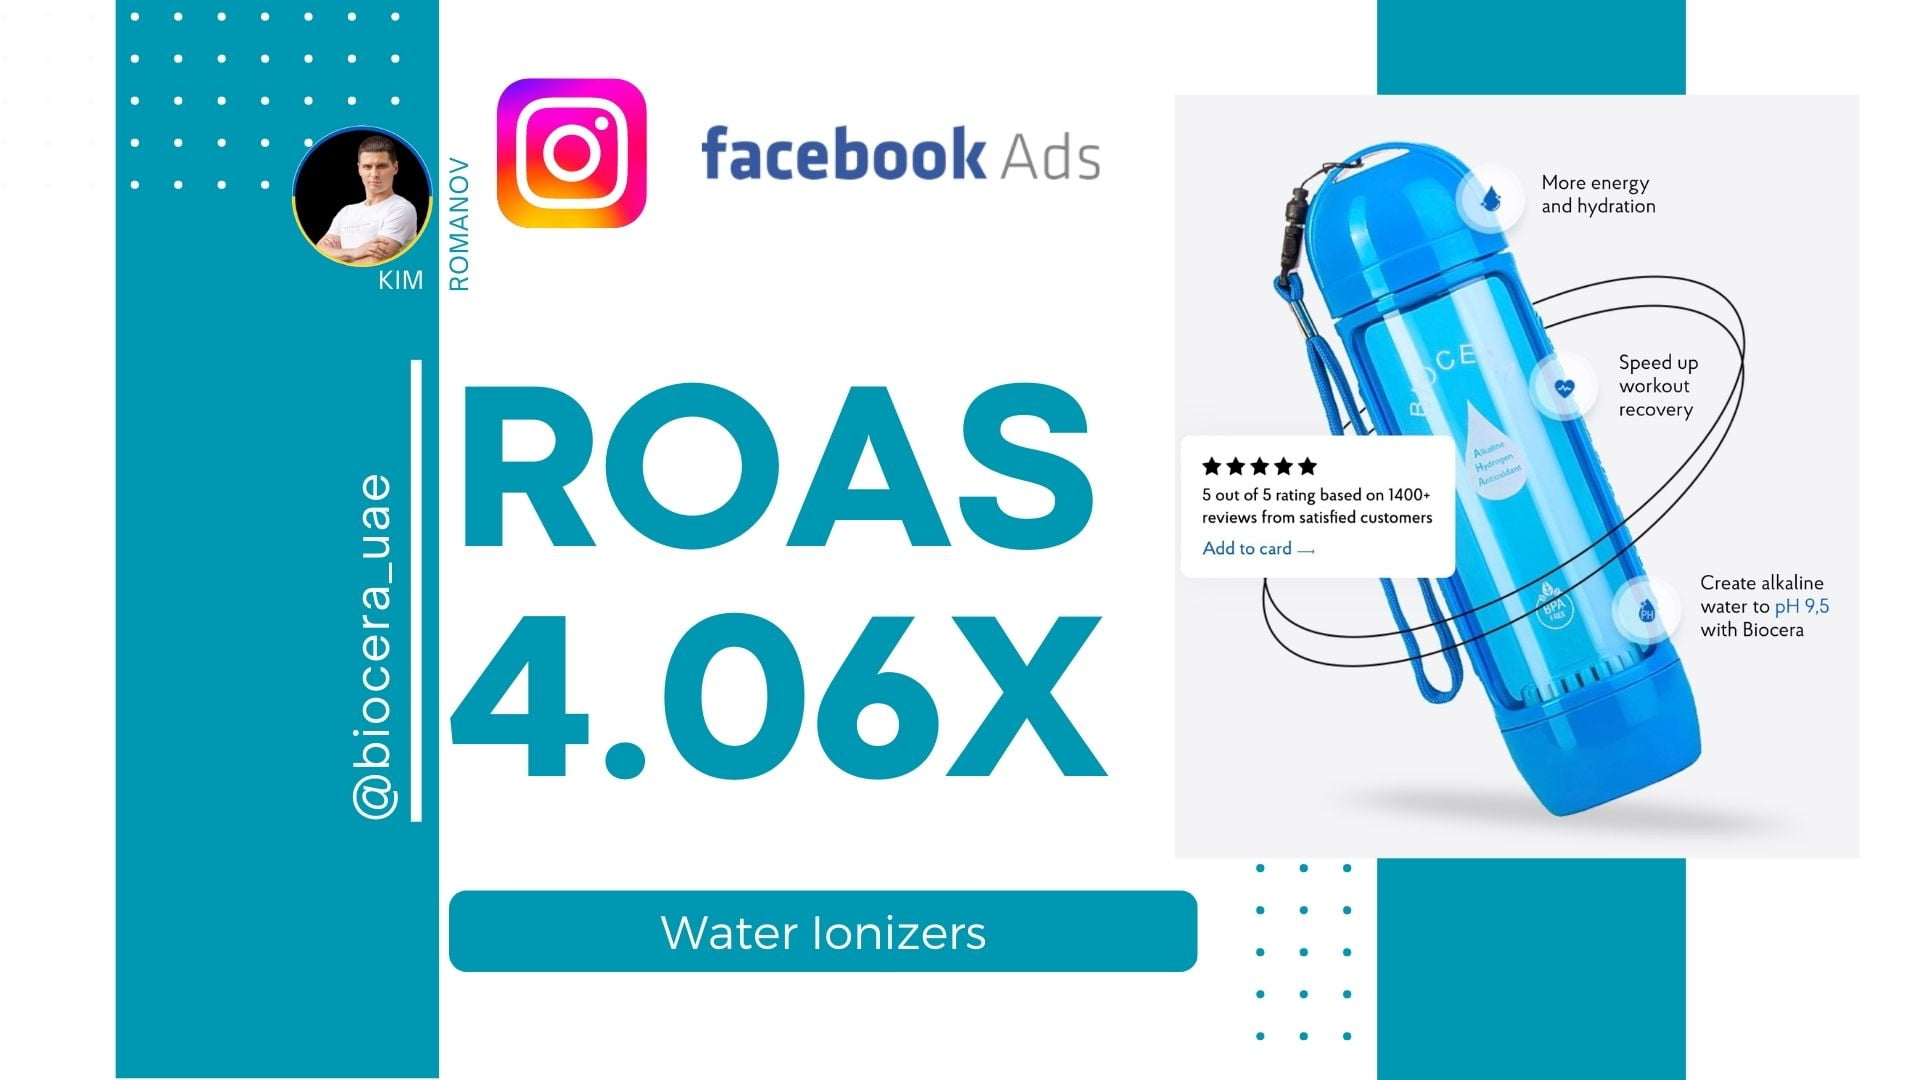 Boosting water ionizer sales with strategic Facebook & Instagram ads, targeting a niche audience and optimizing the sales funnel.